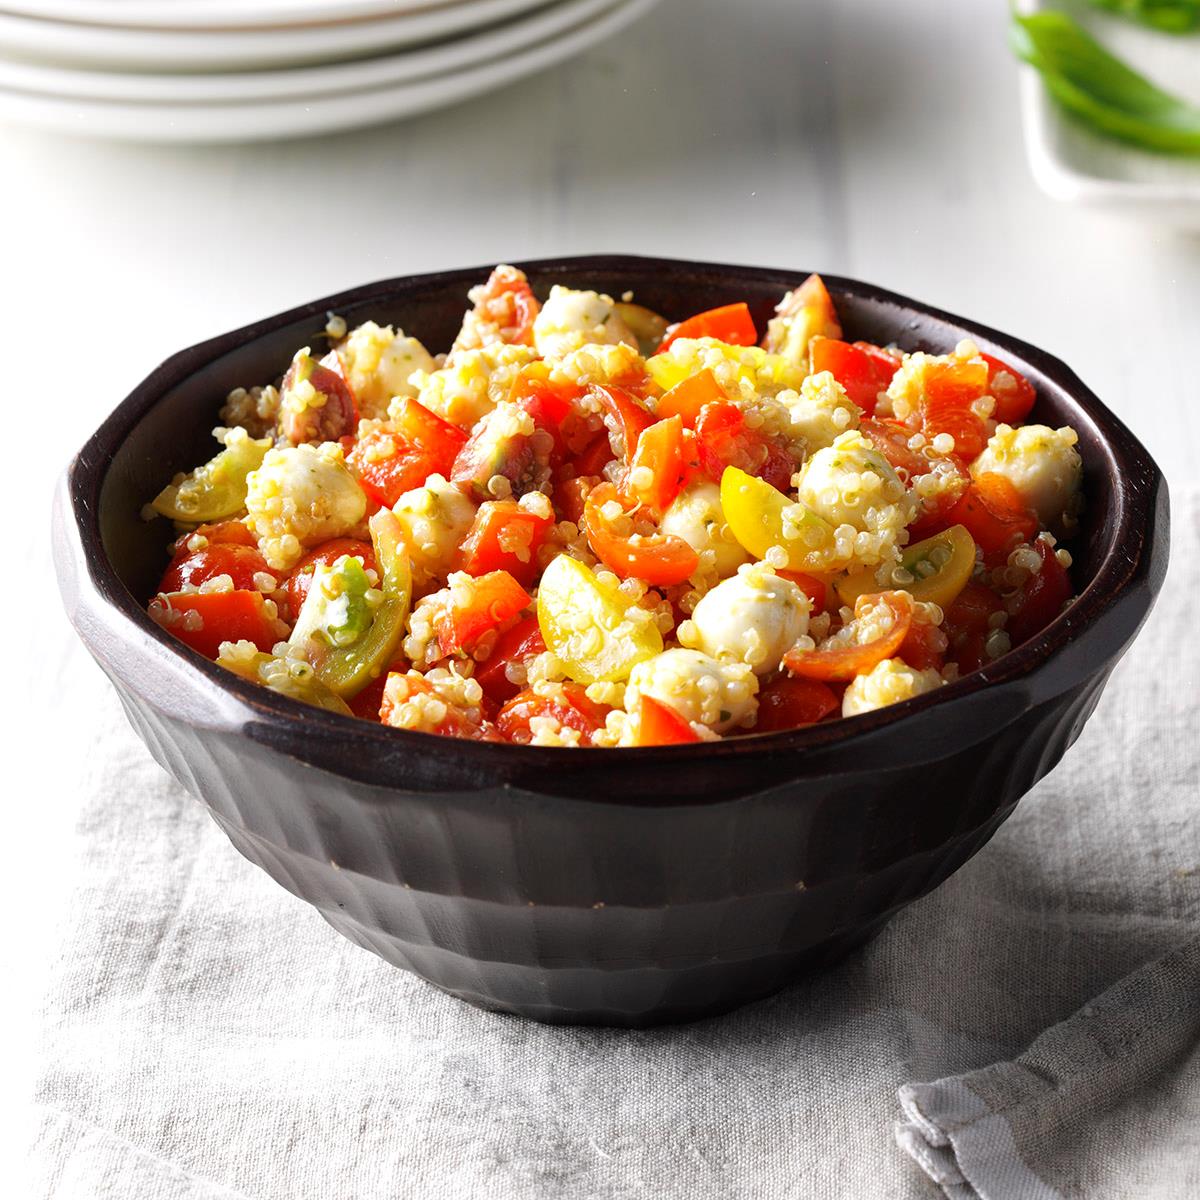 My daughter-in-law got me hooked on quinoa, and I'm so glad she did! I've been substituting quinoa in some of my favorite pasta recipes, and this dish is the happy result of one of those experiments. I love using my garden tomatoes and peppers in this salad; however, sun-dried tomatoes and roasted red peppers are equally delicious. —Sue Gronholz, Beaver Dam, Wisconsin <a href="https://www.tasteofhome.com/recipes/pesto-quinoa-salad/">Get Recipe</a>